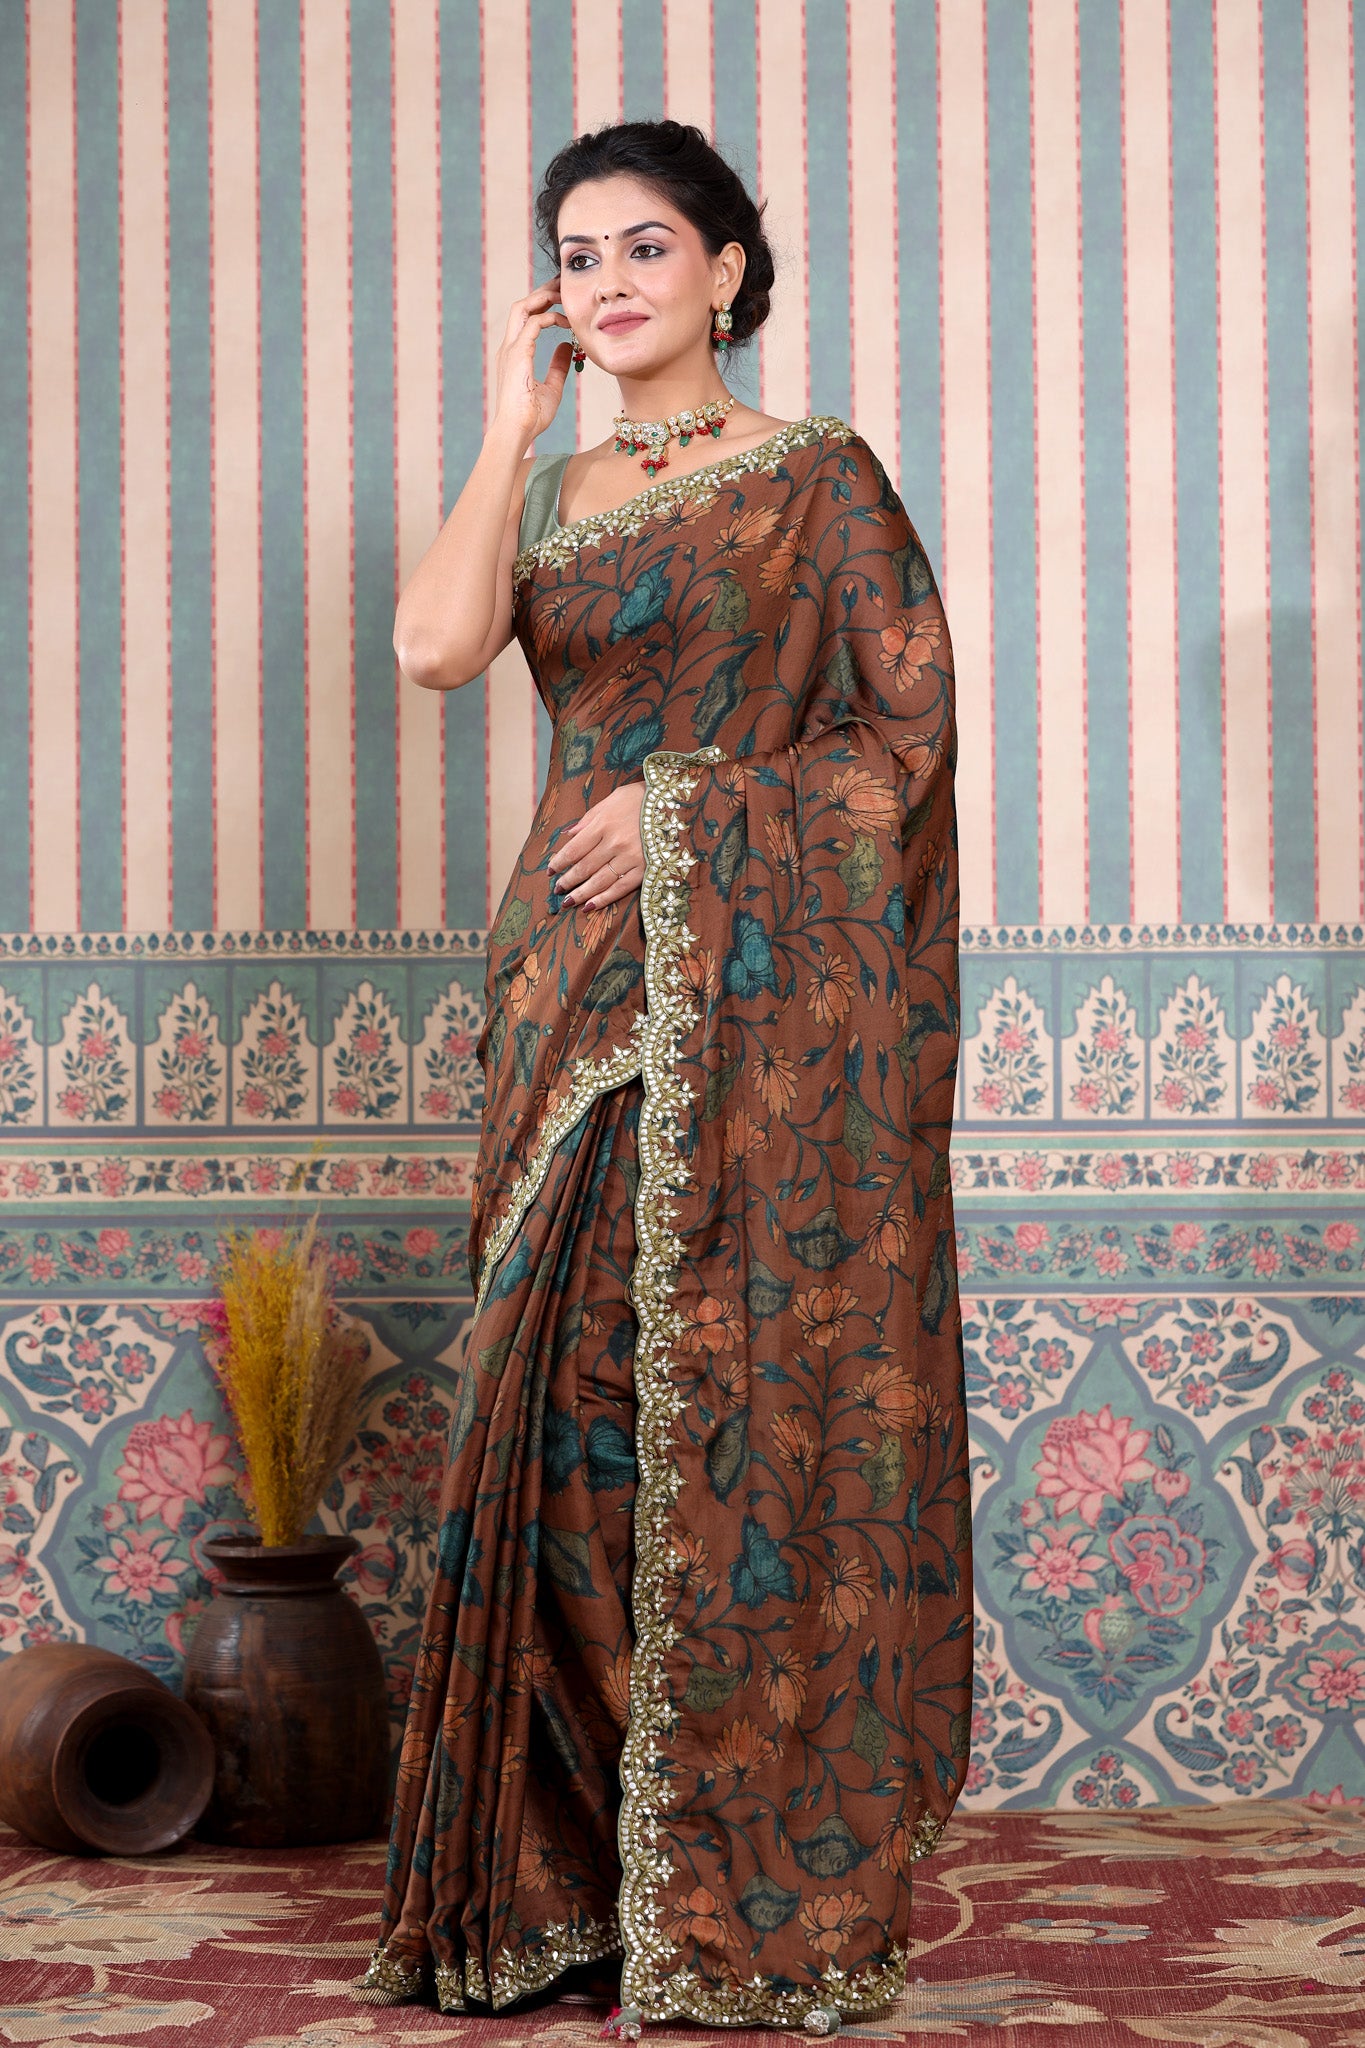 Buy brown printed Mulbery silk sari online in USA with scalloped border. Make a fashion statement at weddings with stunning designer sarees, embroidered sarees with blouse, wedding sarees, handloom sarees from Pure Elegance Indian fashion store in USA.-pallu